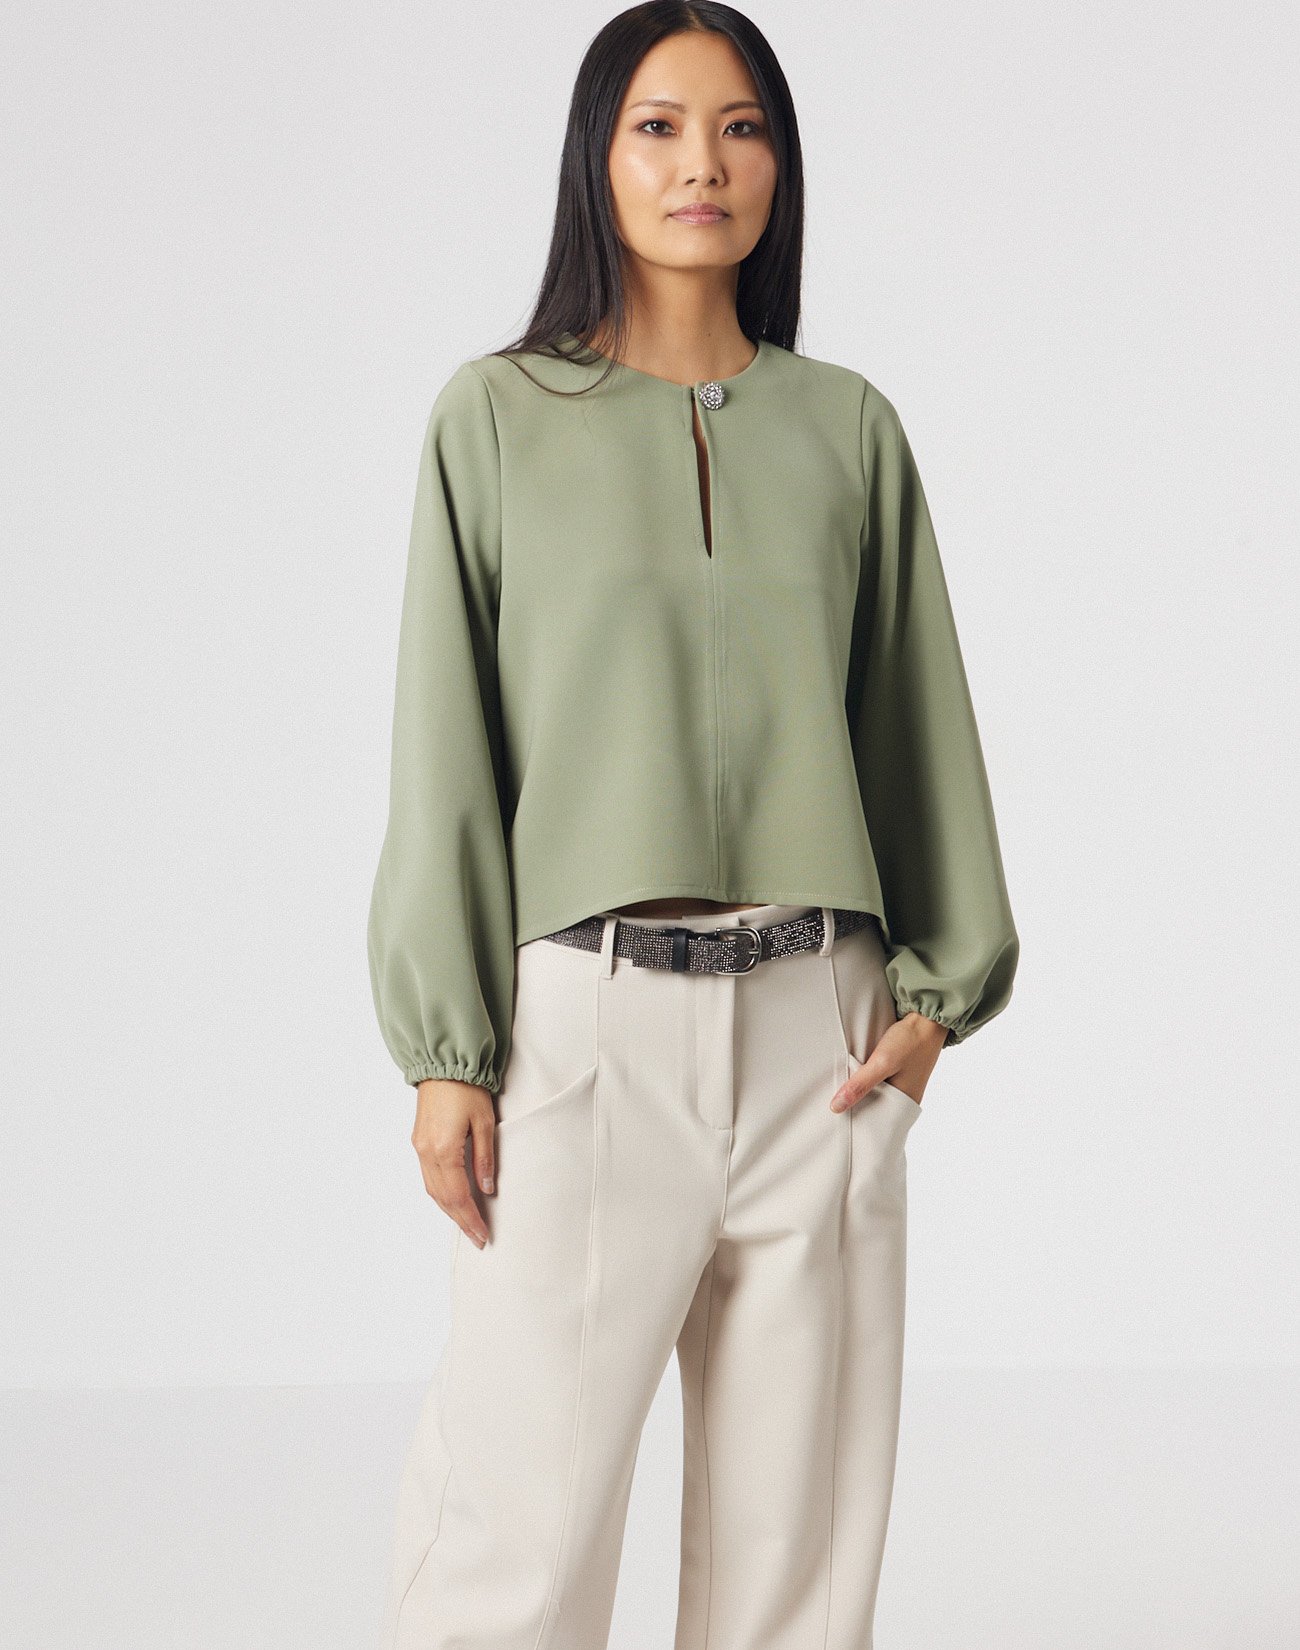 Asymmetric blouse with jewel button